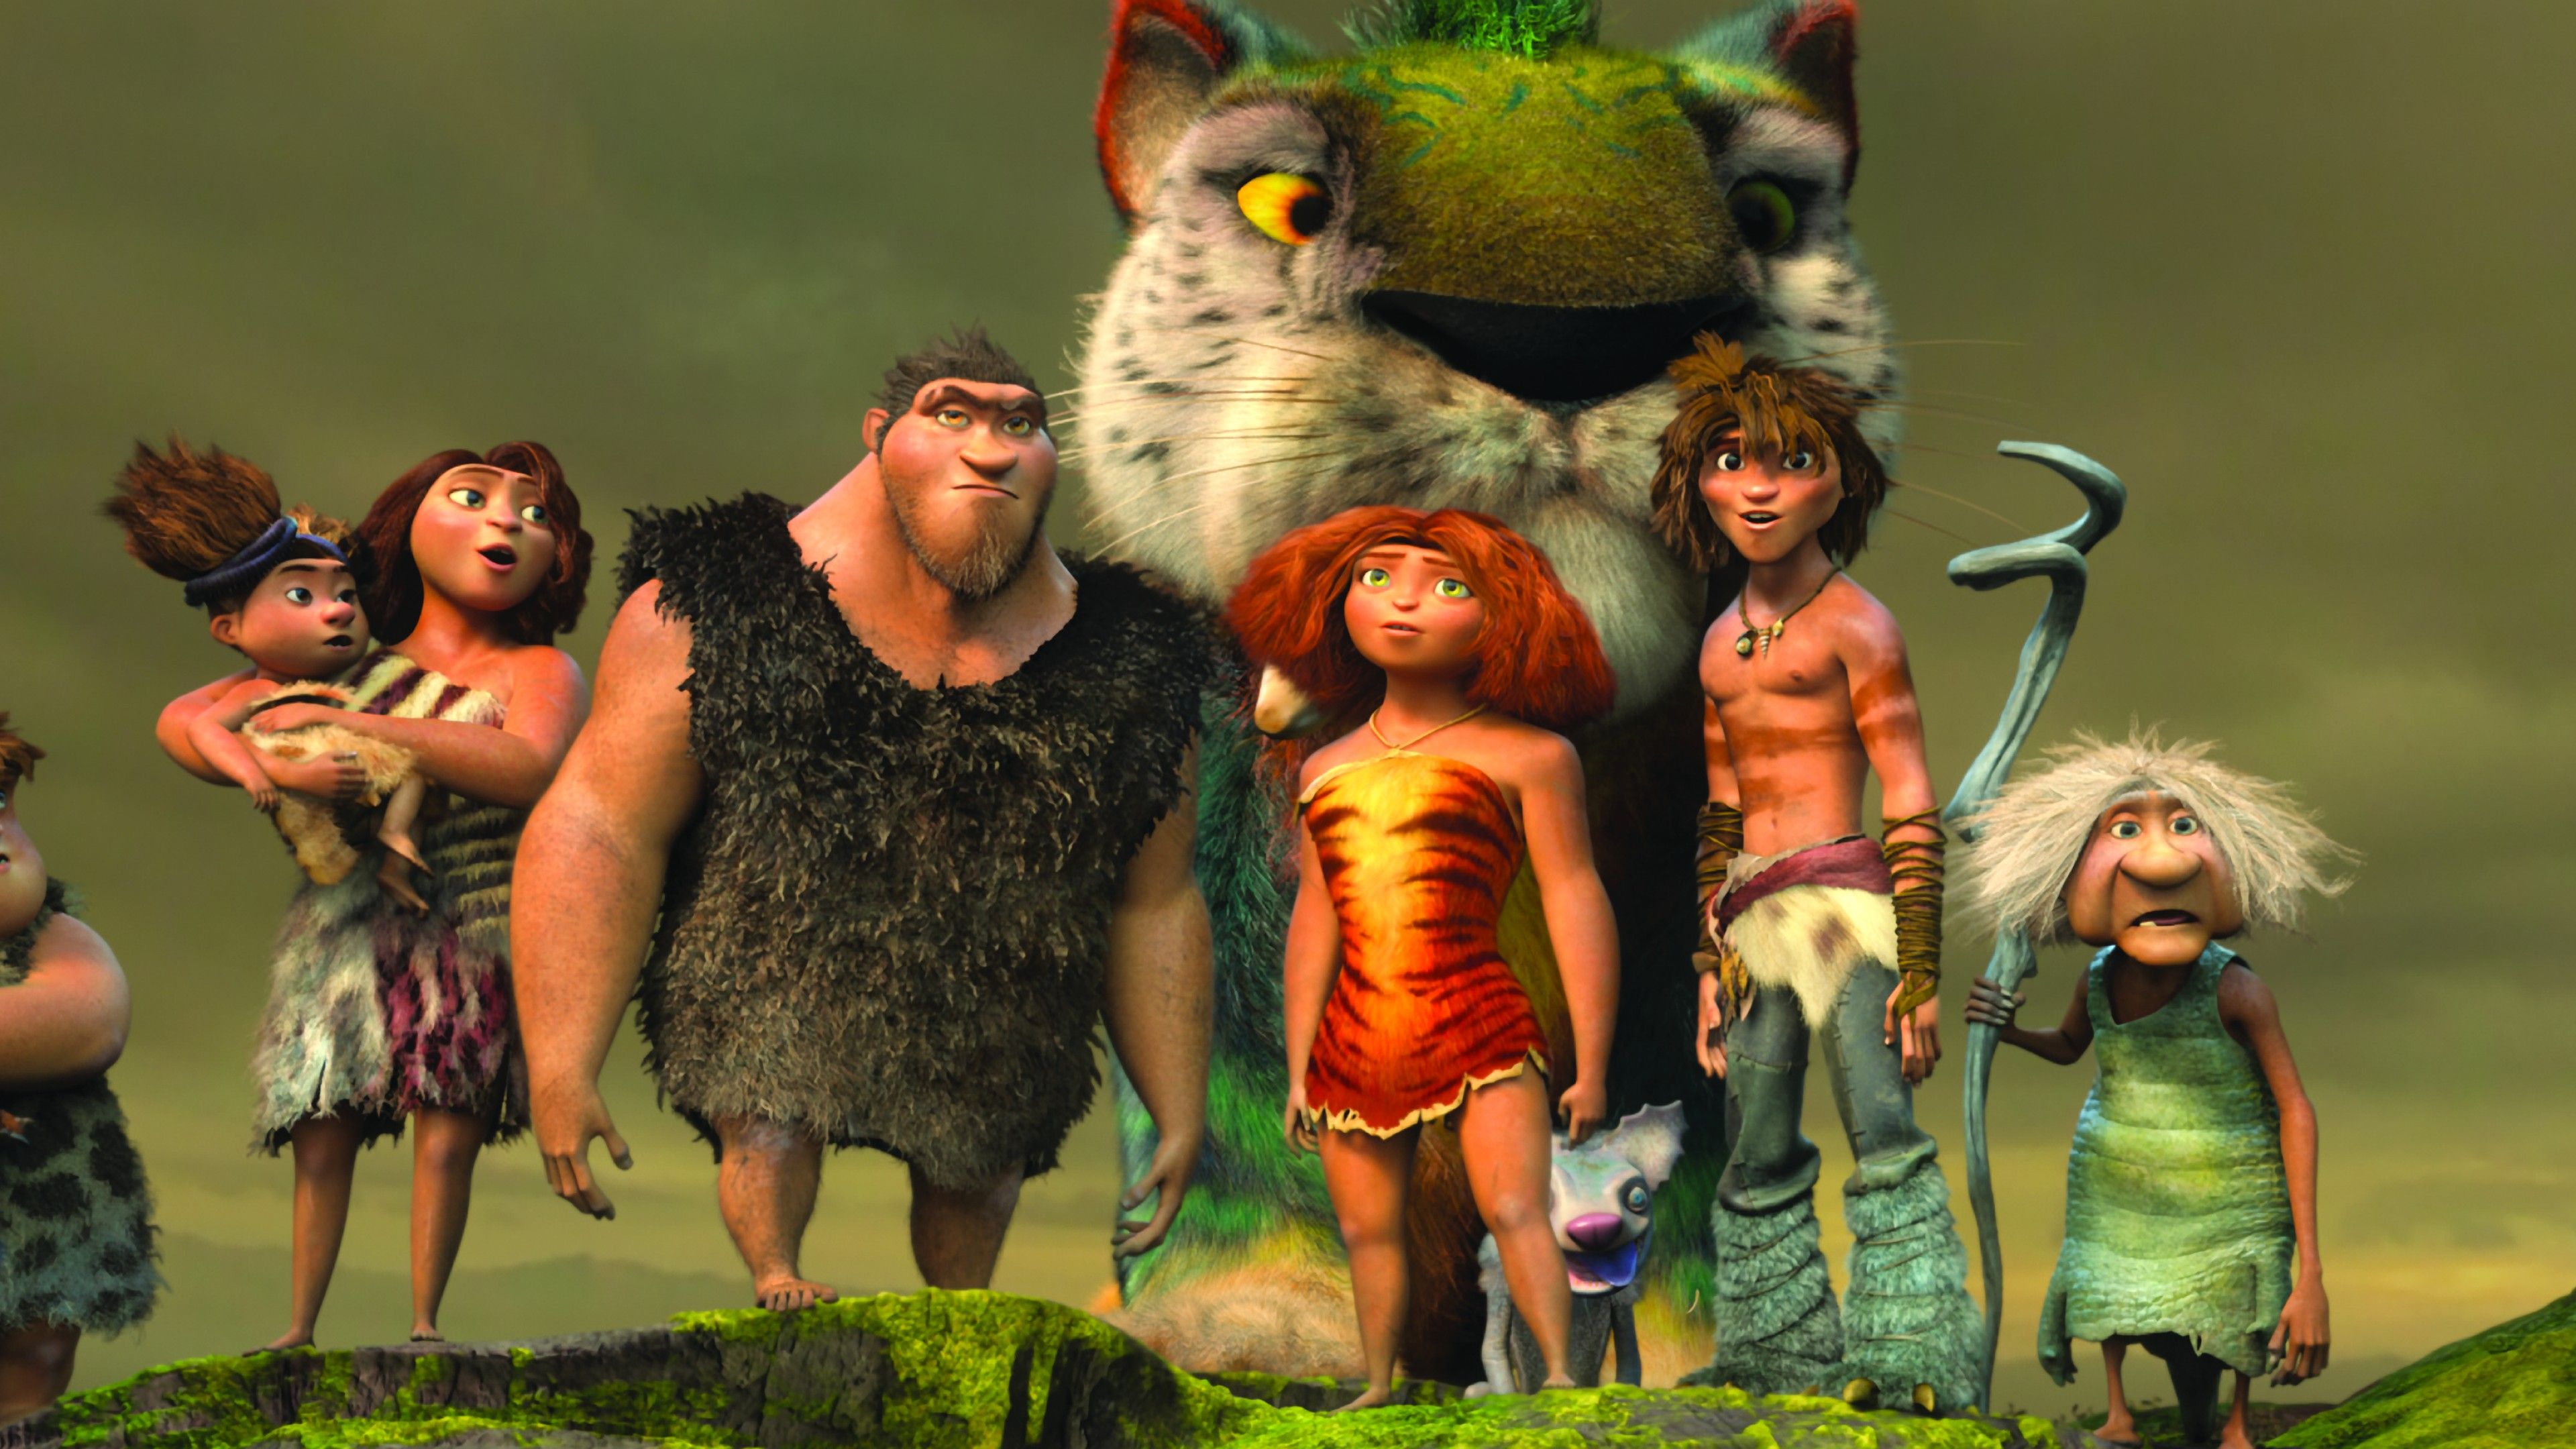 The Croods 2 Wallpapers - Wallpaper Cave.